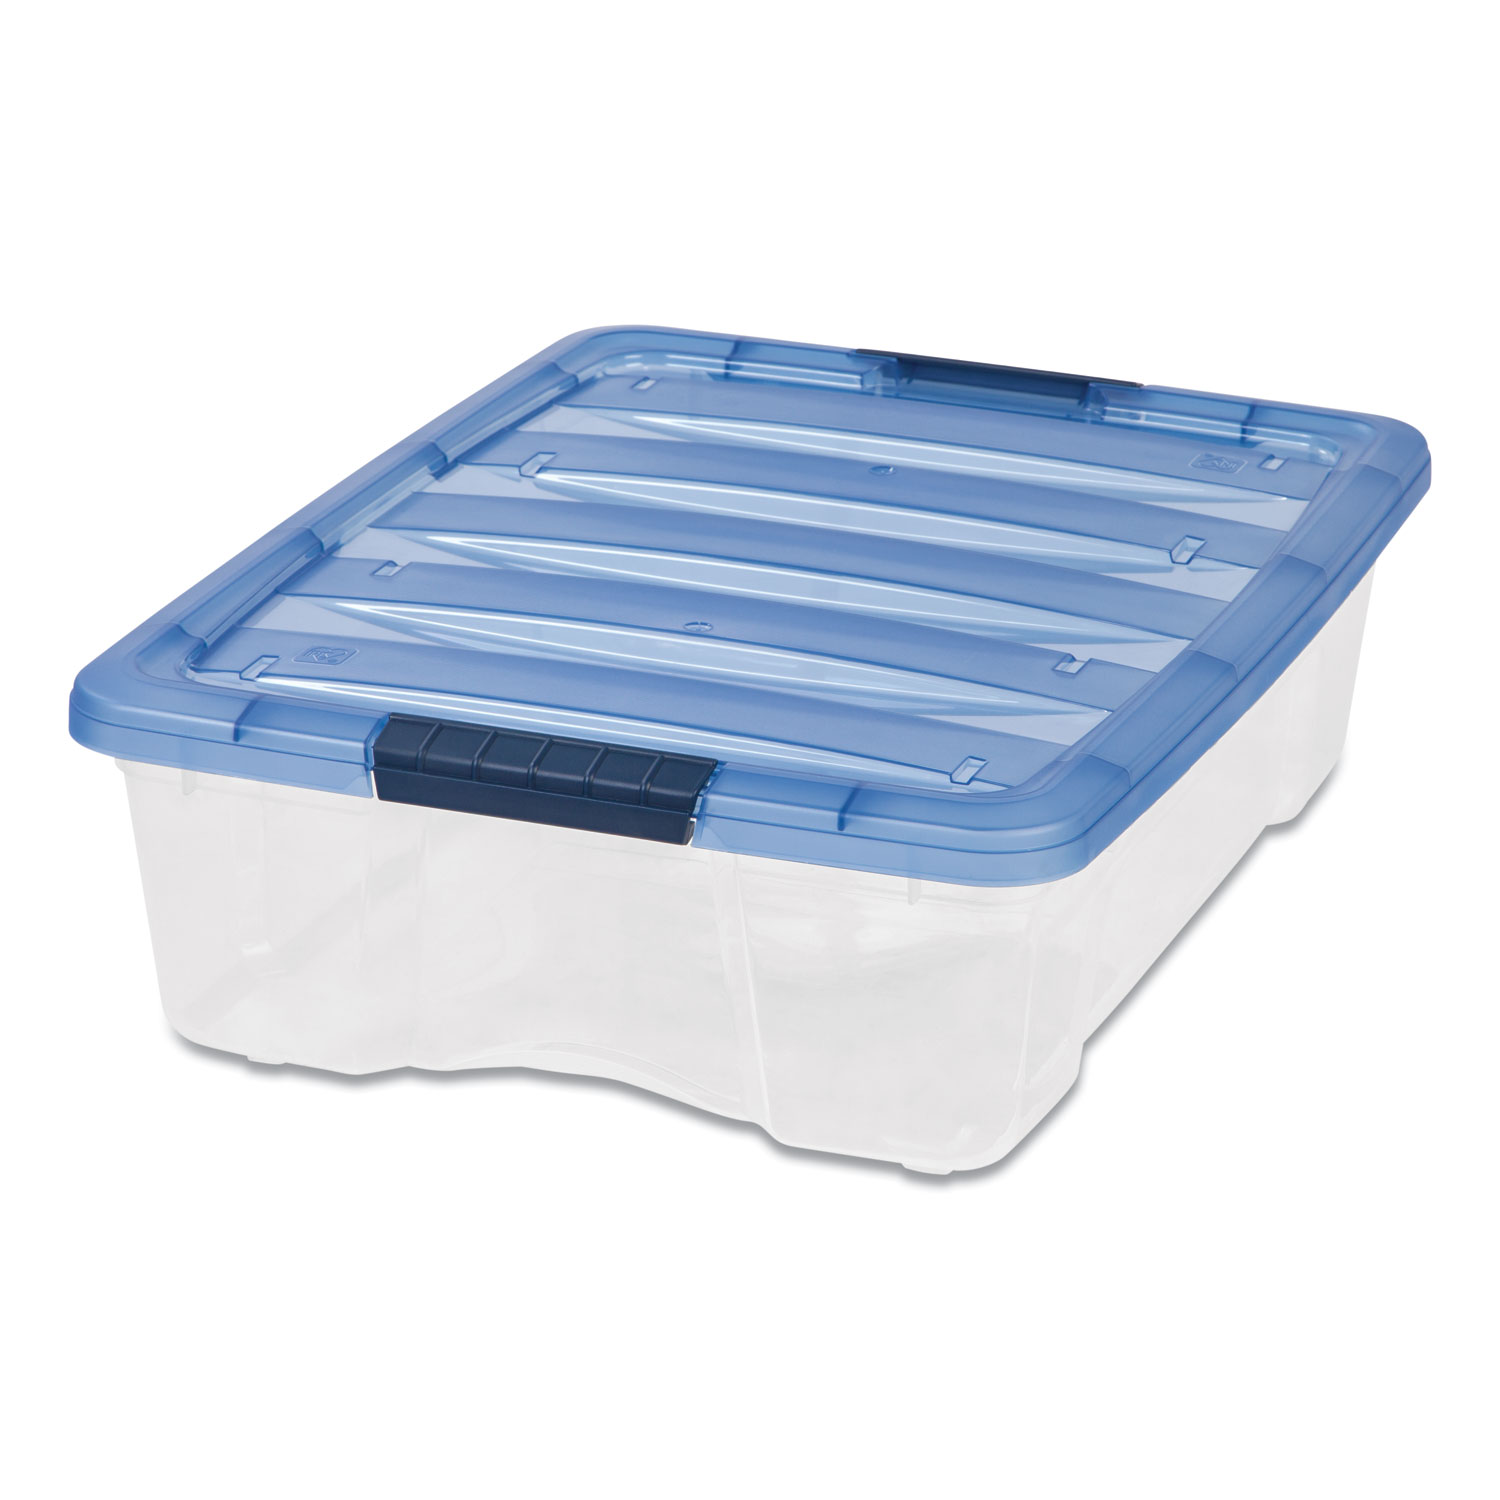 IRIS Stack and Pull Latching Flat Lid Storage Box, 6.73 gal, 16.5 x 22 x 6.5, Clear/Translucent Blue